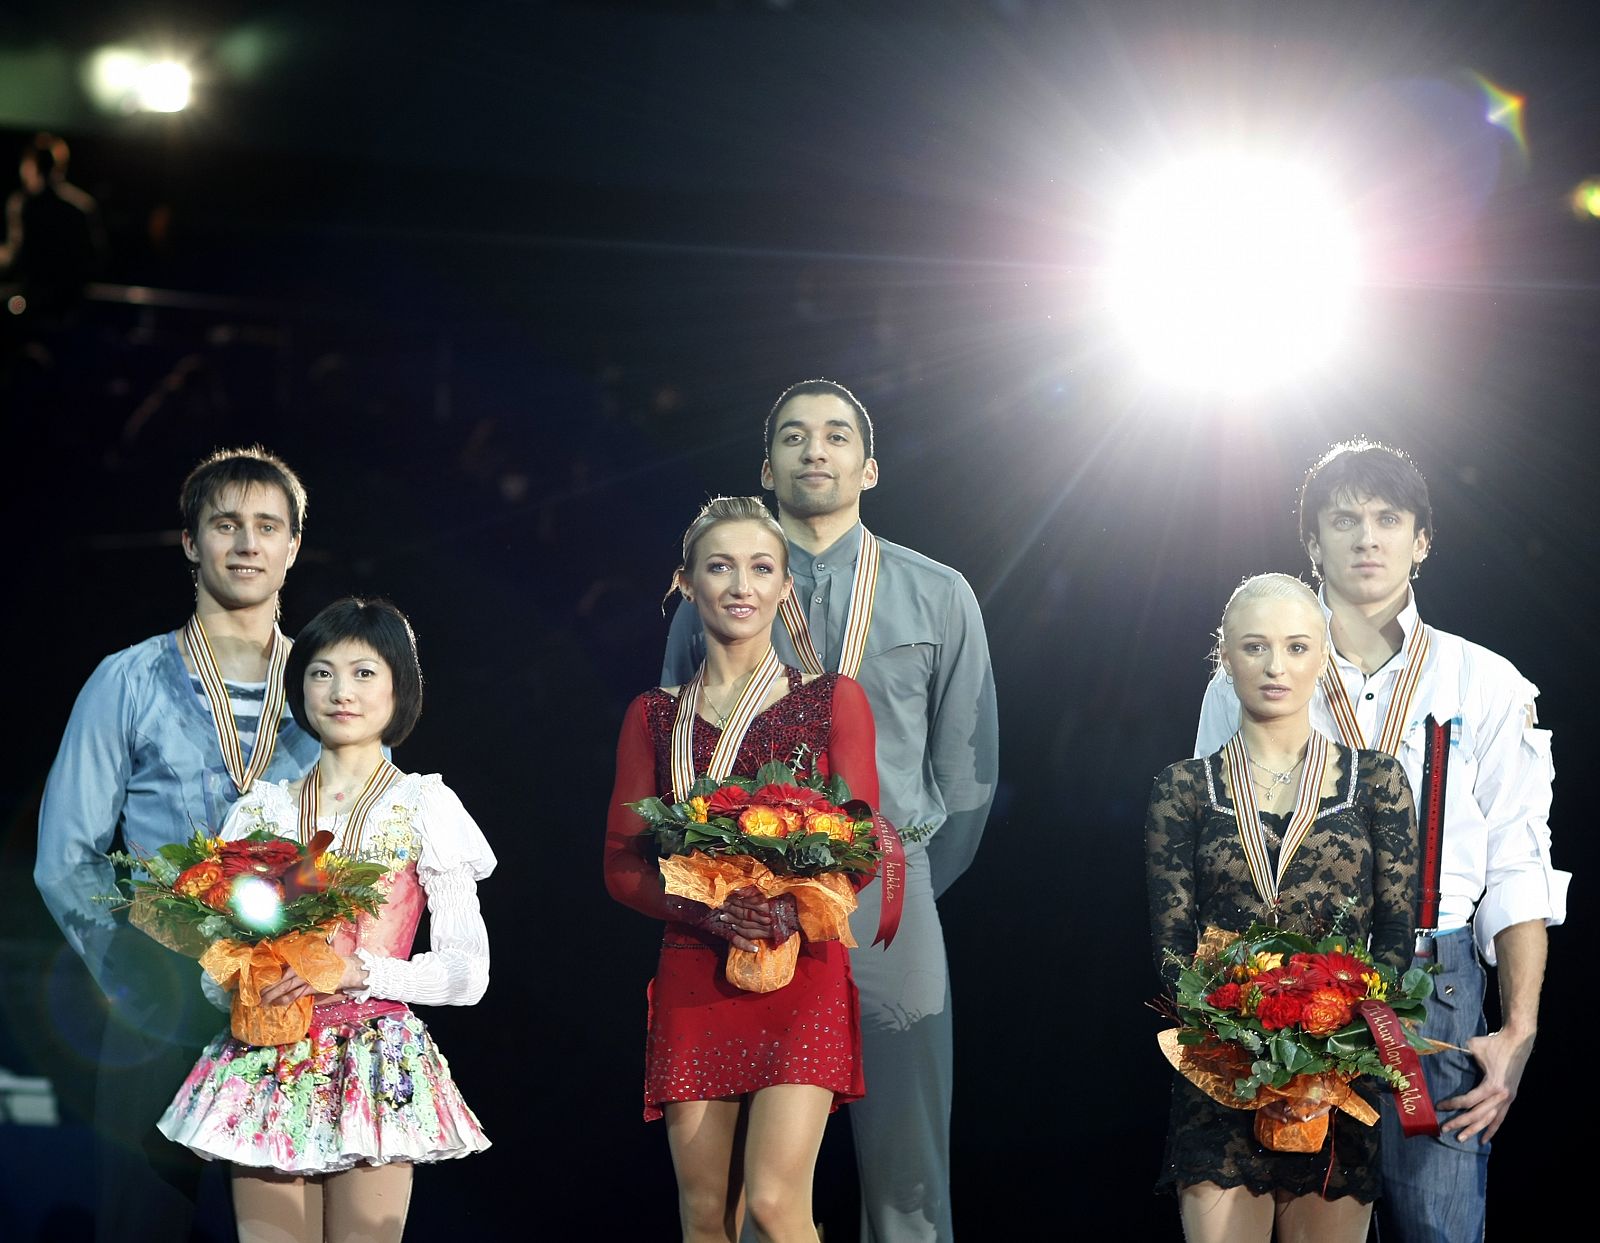 Kawaguchi and Smirnov of Russia Savchenko and Szolkowy of Germany and Mukhortova and Trankov of Russia  pose with medals after winning pairs free program at the European Figure Skating Championships in Helsinki